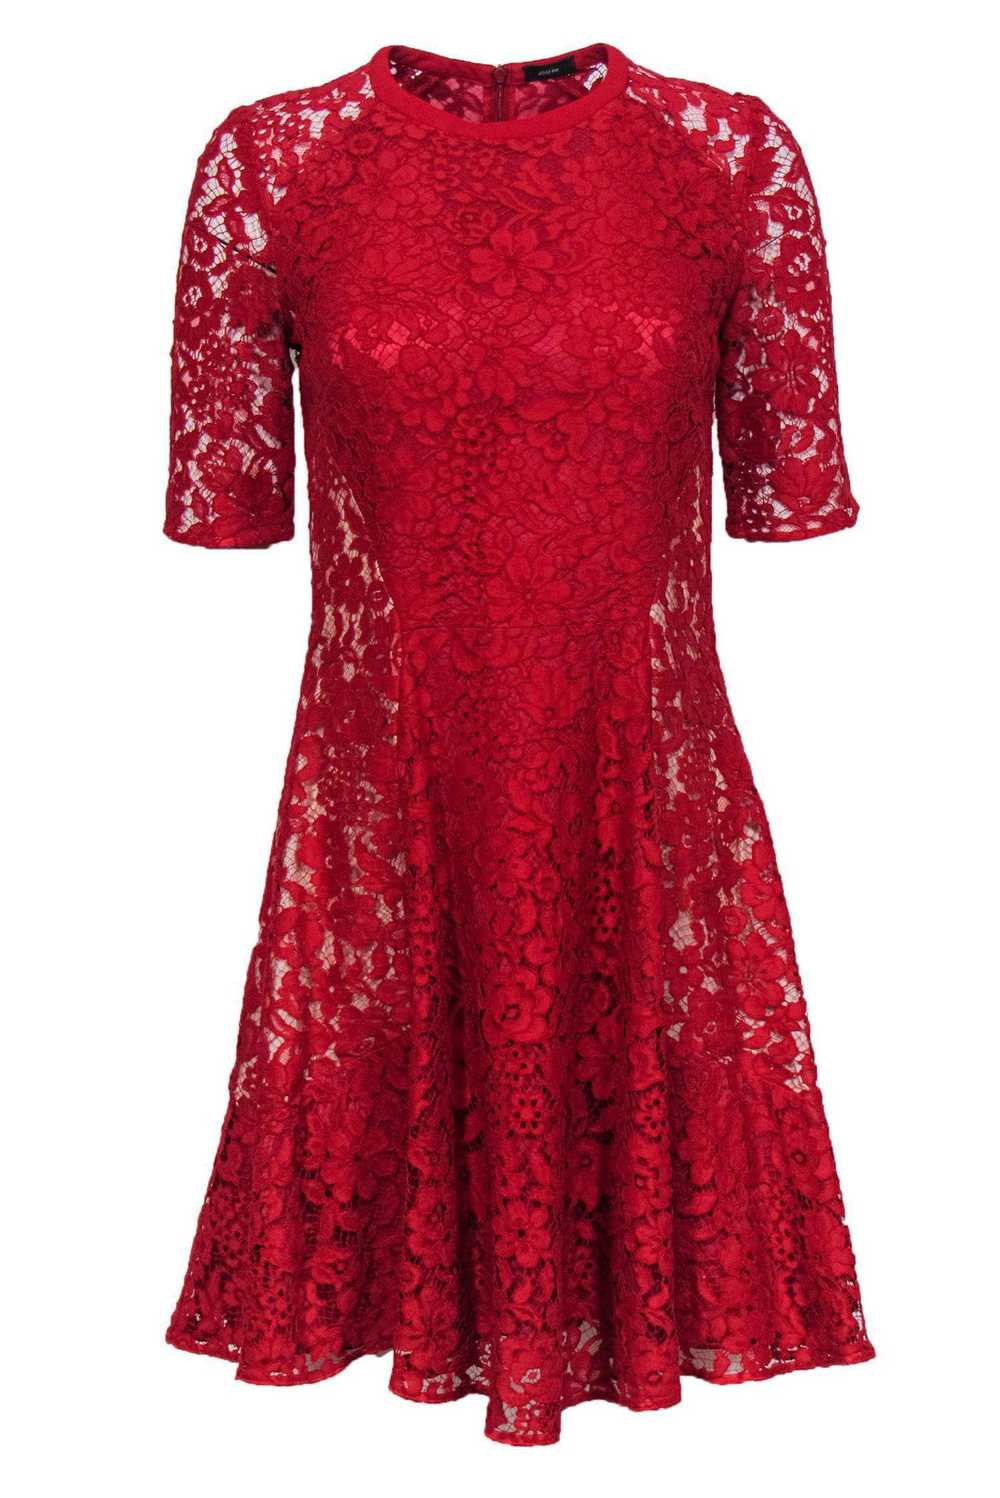 Joseph - Red Lace Cropped Sleeve Cocktail Dress S… - image 1